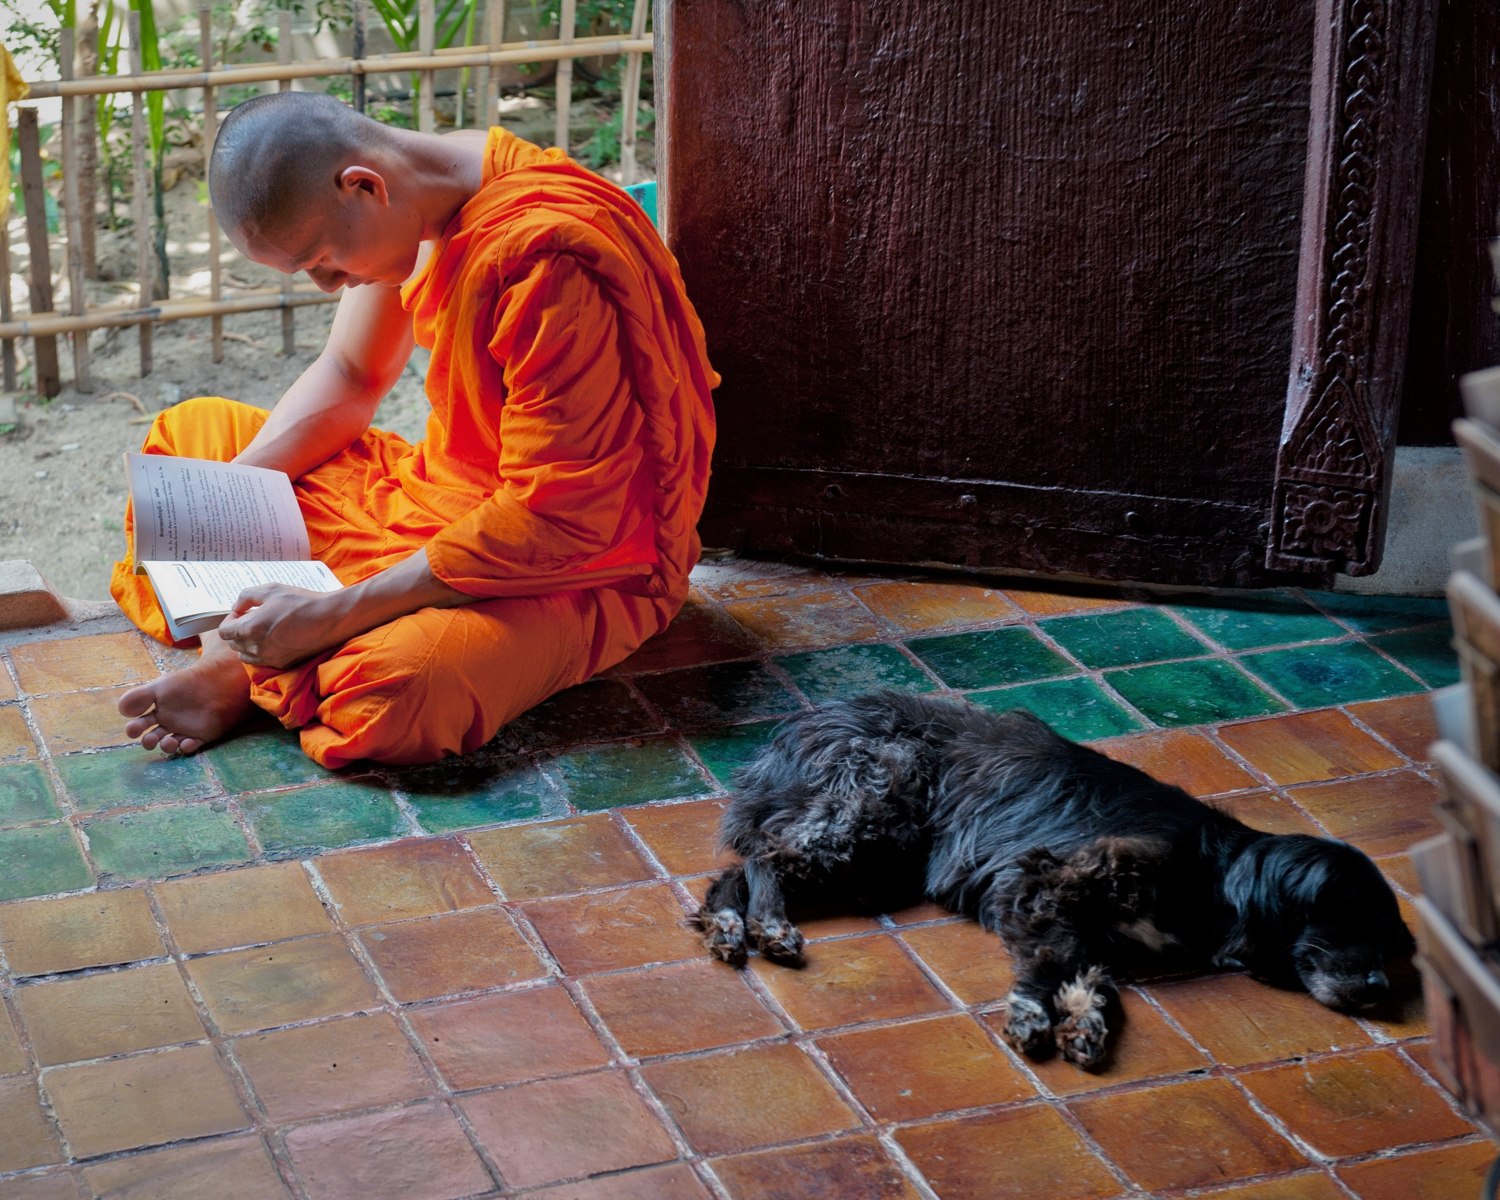 Monk studing the Sutras, Chaing Mai, Thailand